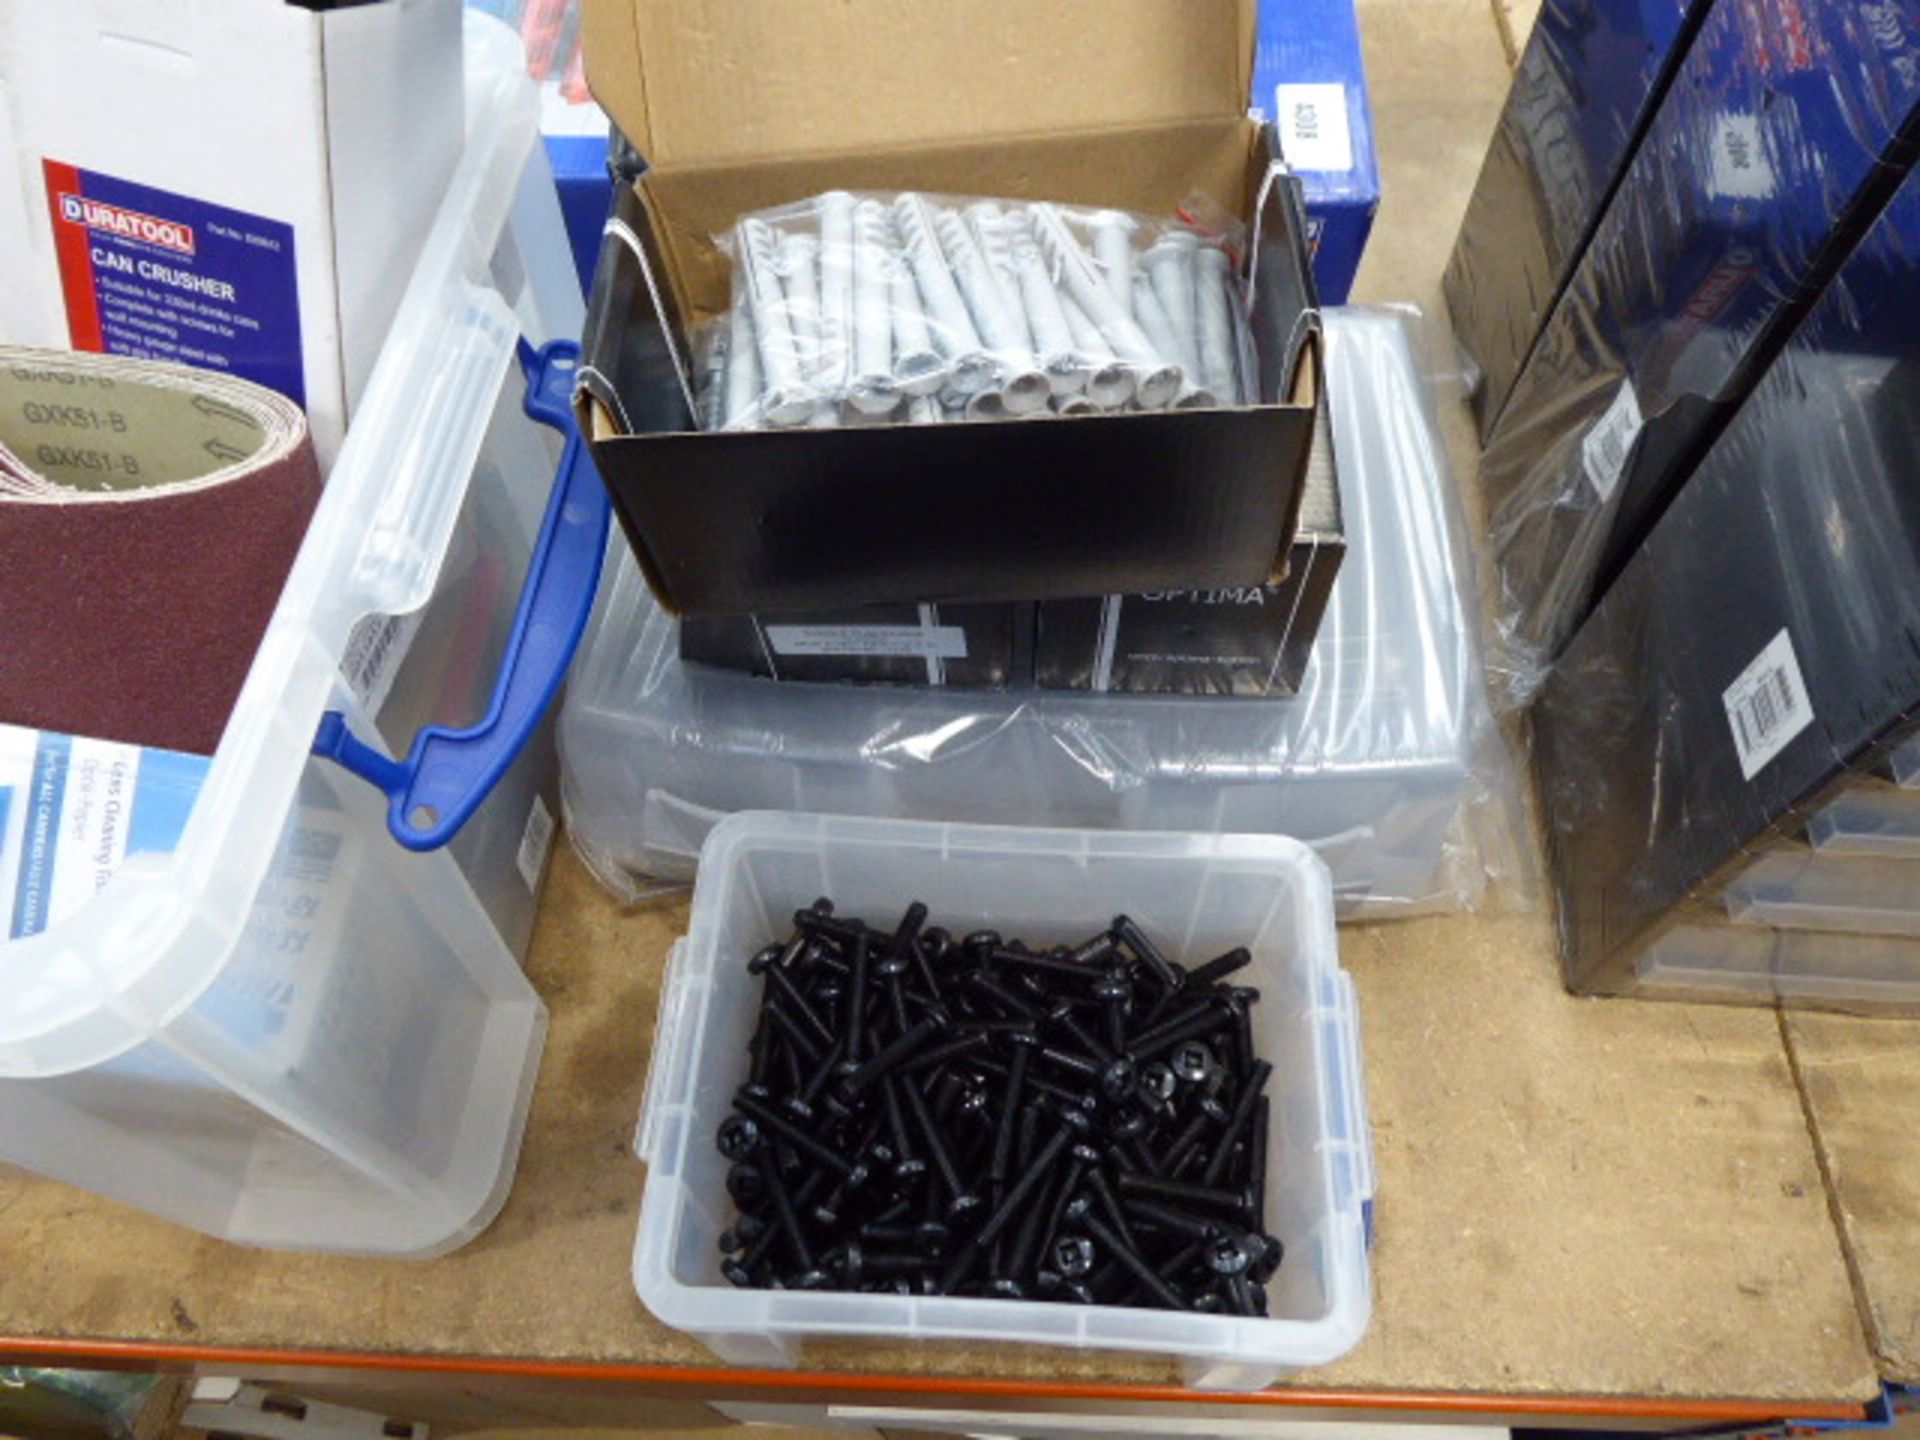 4 boxes of satellite TV aerial fixings, box of black bolts and a plastic container